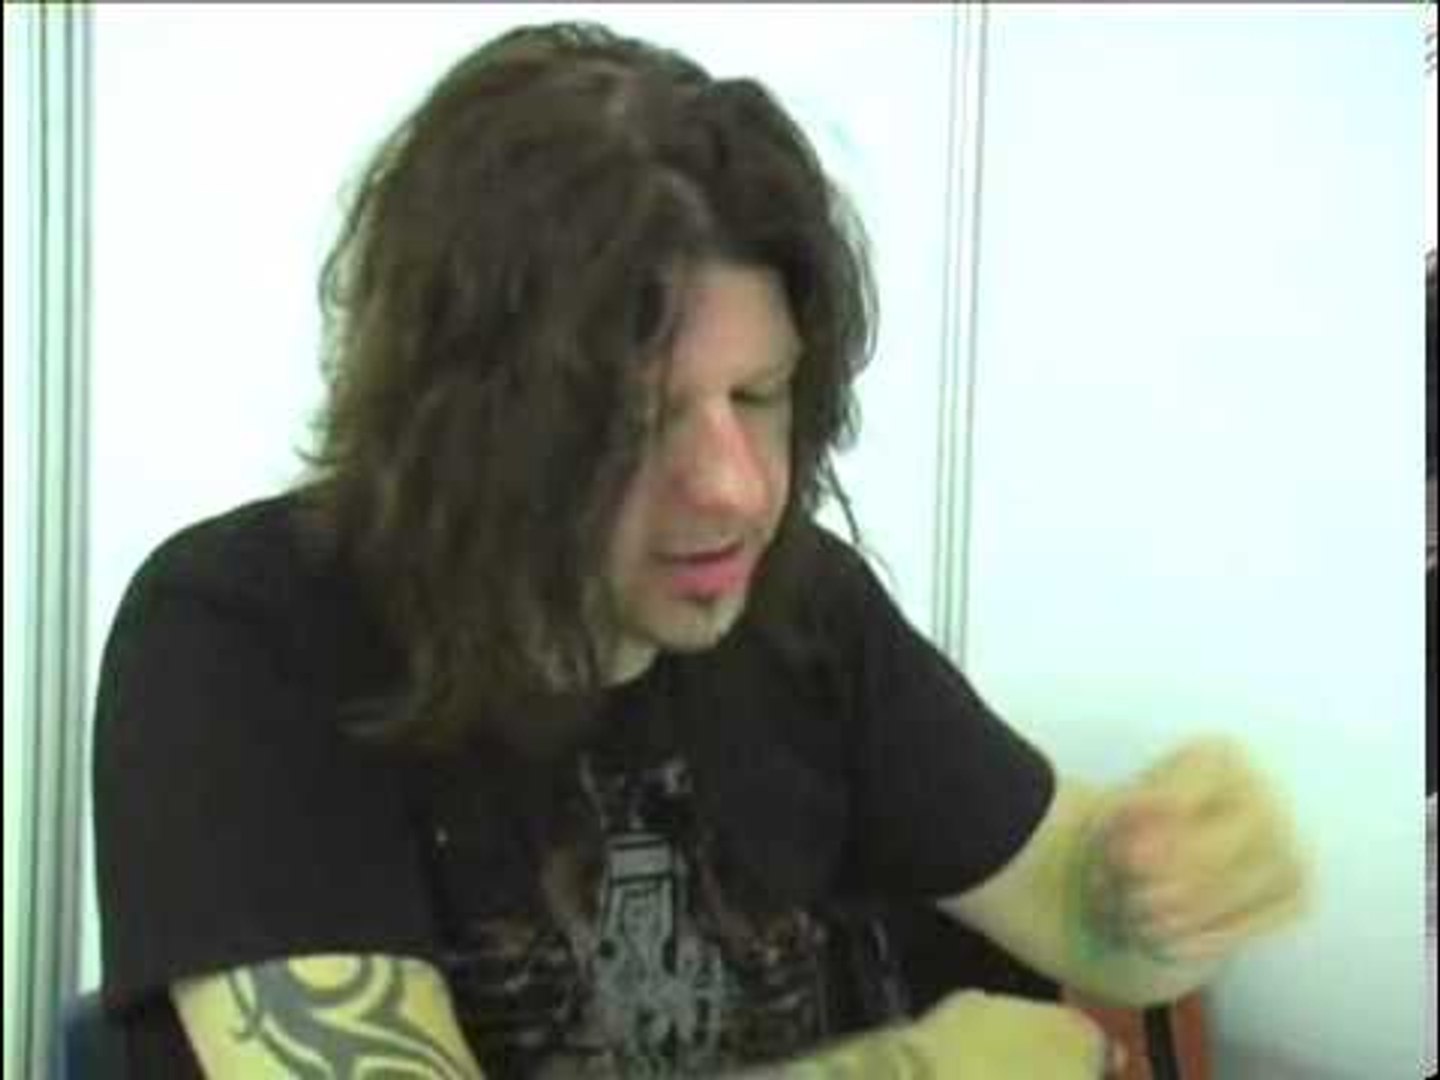 Stone Sour 2006 interview - Jim Root (part 4) - Video Dailymotion